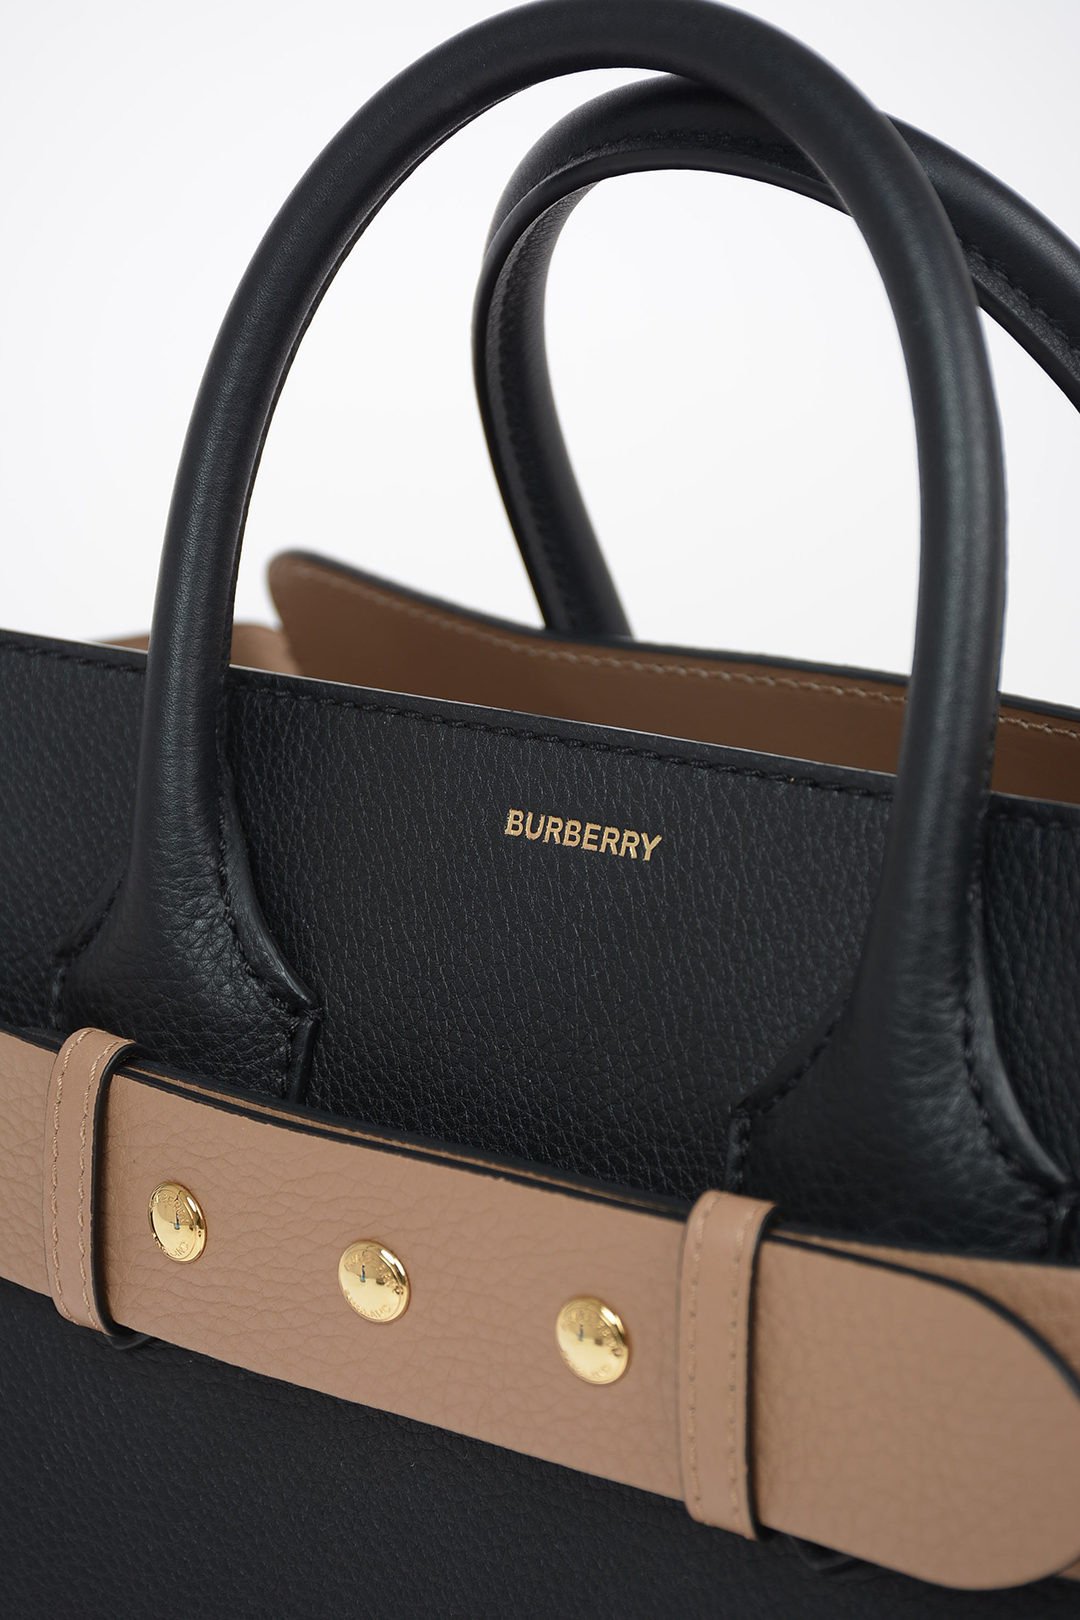 Burberry Leather Tote Bag With Removable Shoulder Strap women - Glamood  Outlet